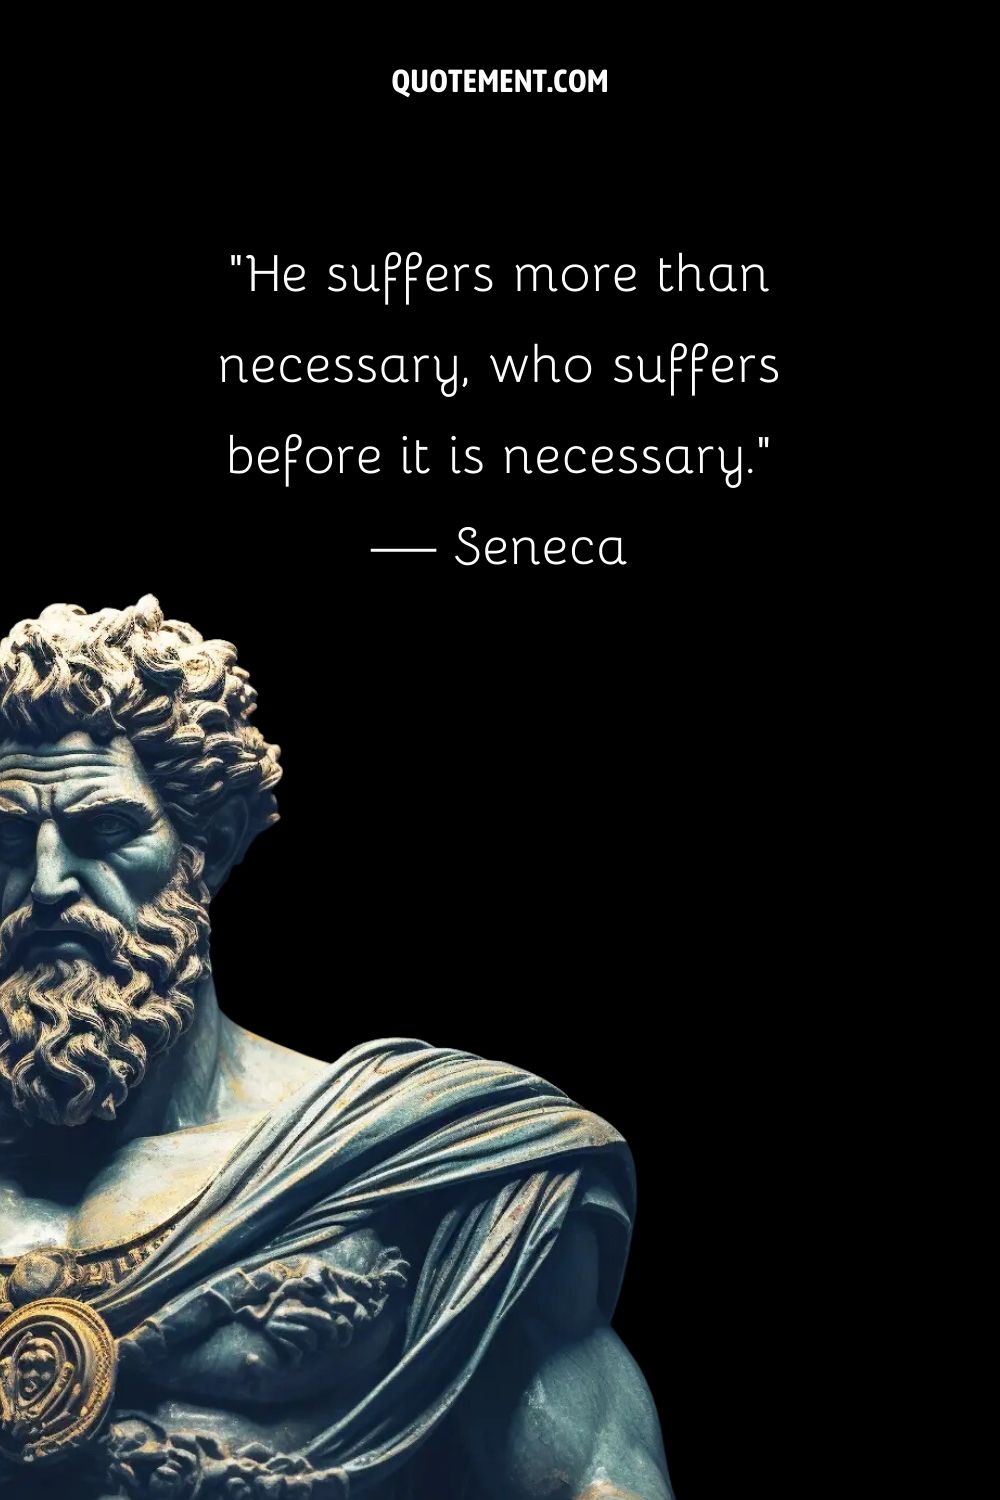 “He suffers more than necessary, who suffers before it is necessary.” — Seneca